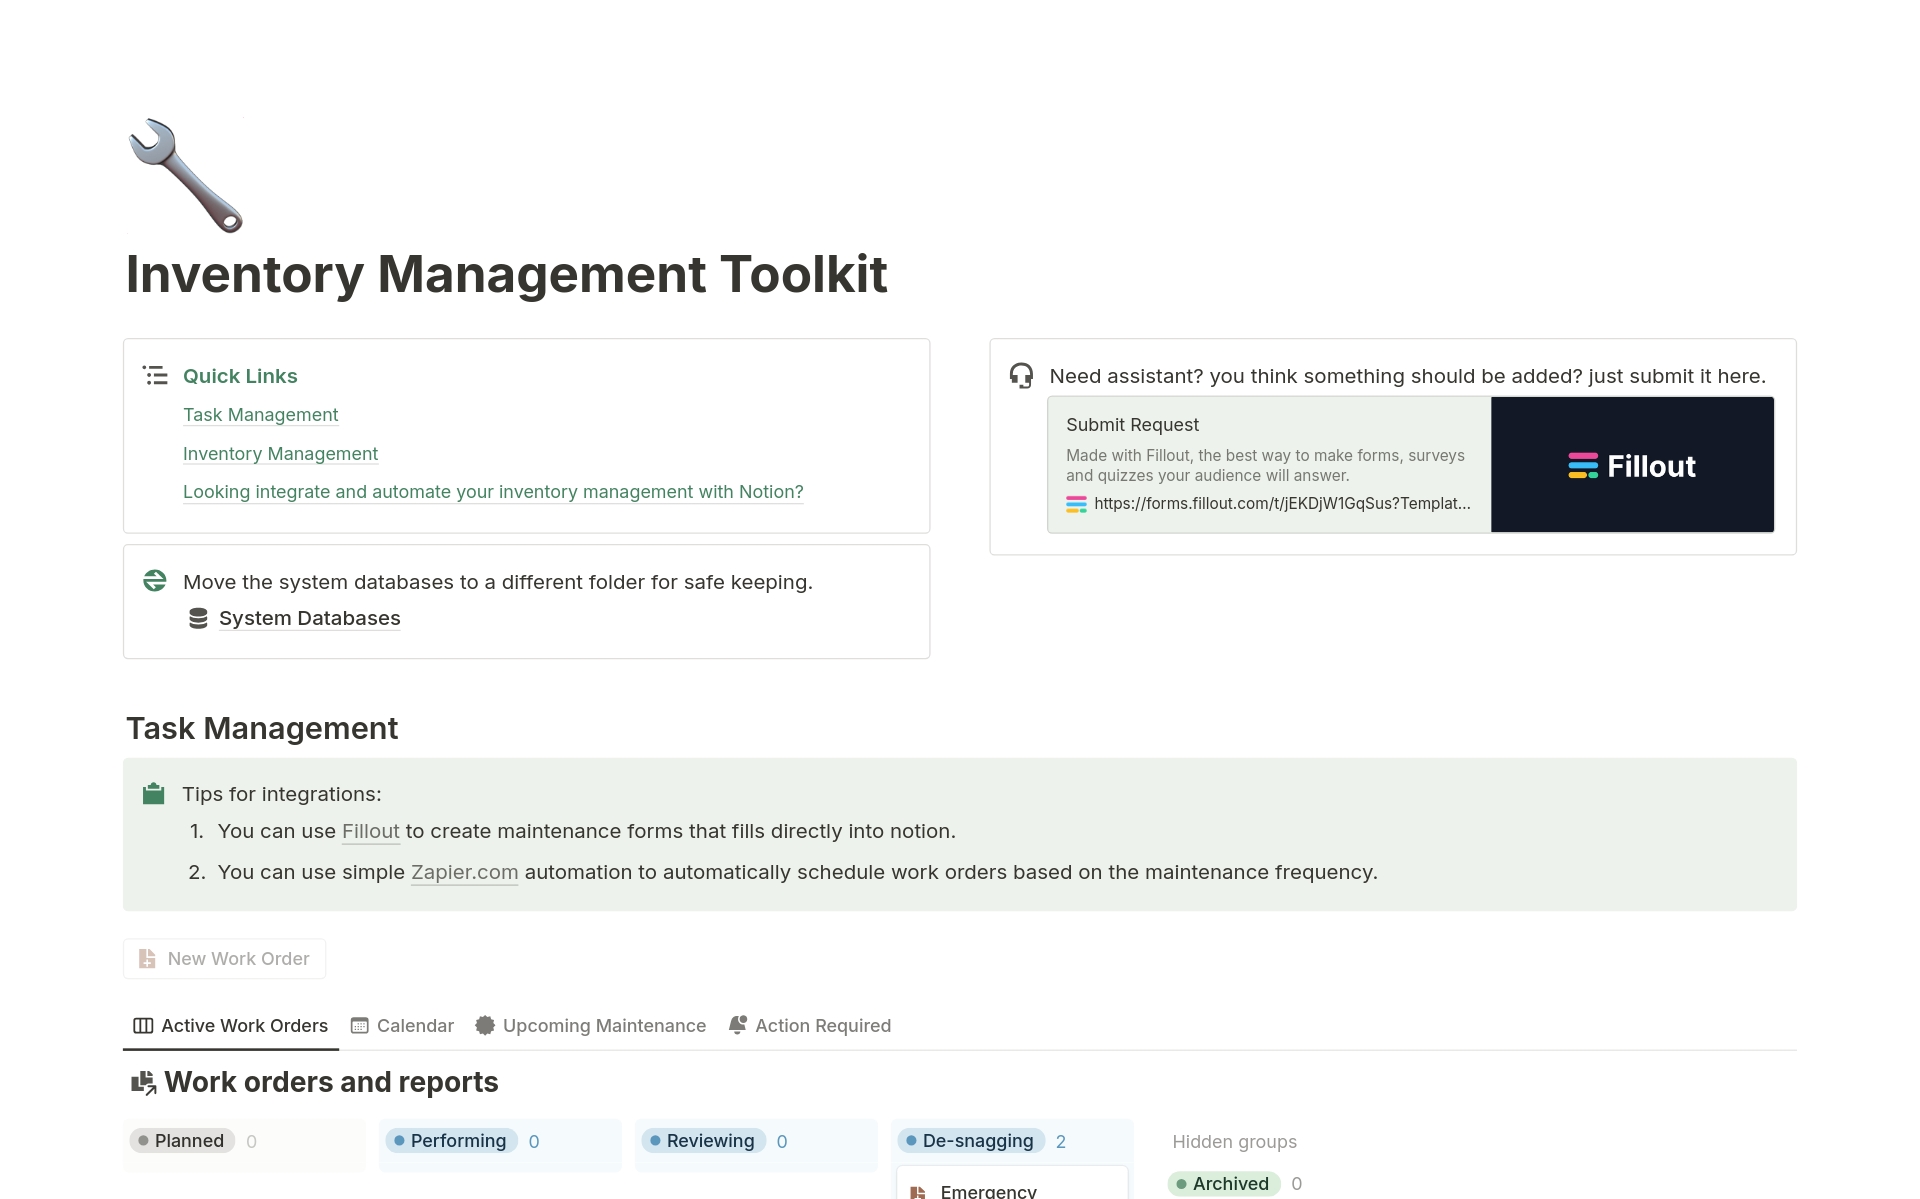 Screenshot of Best 7 Incident Report Templates for Mechanical Engineers collection by Notion